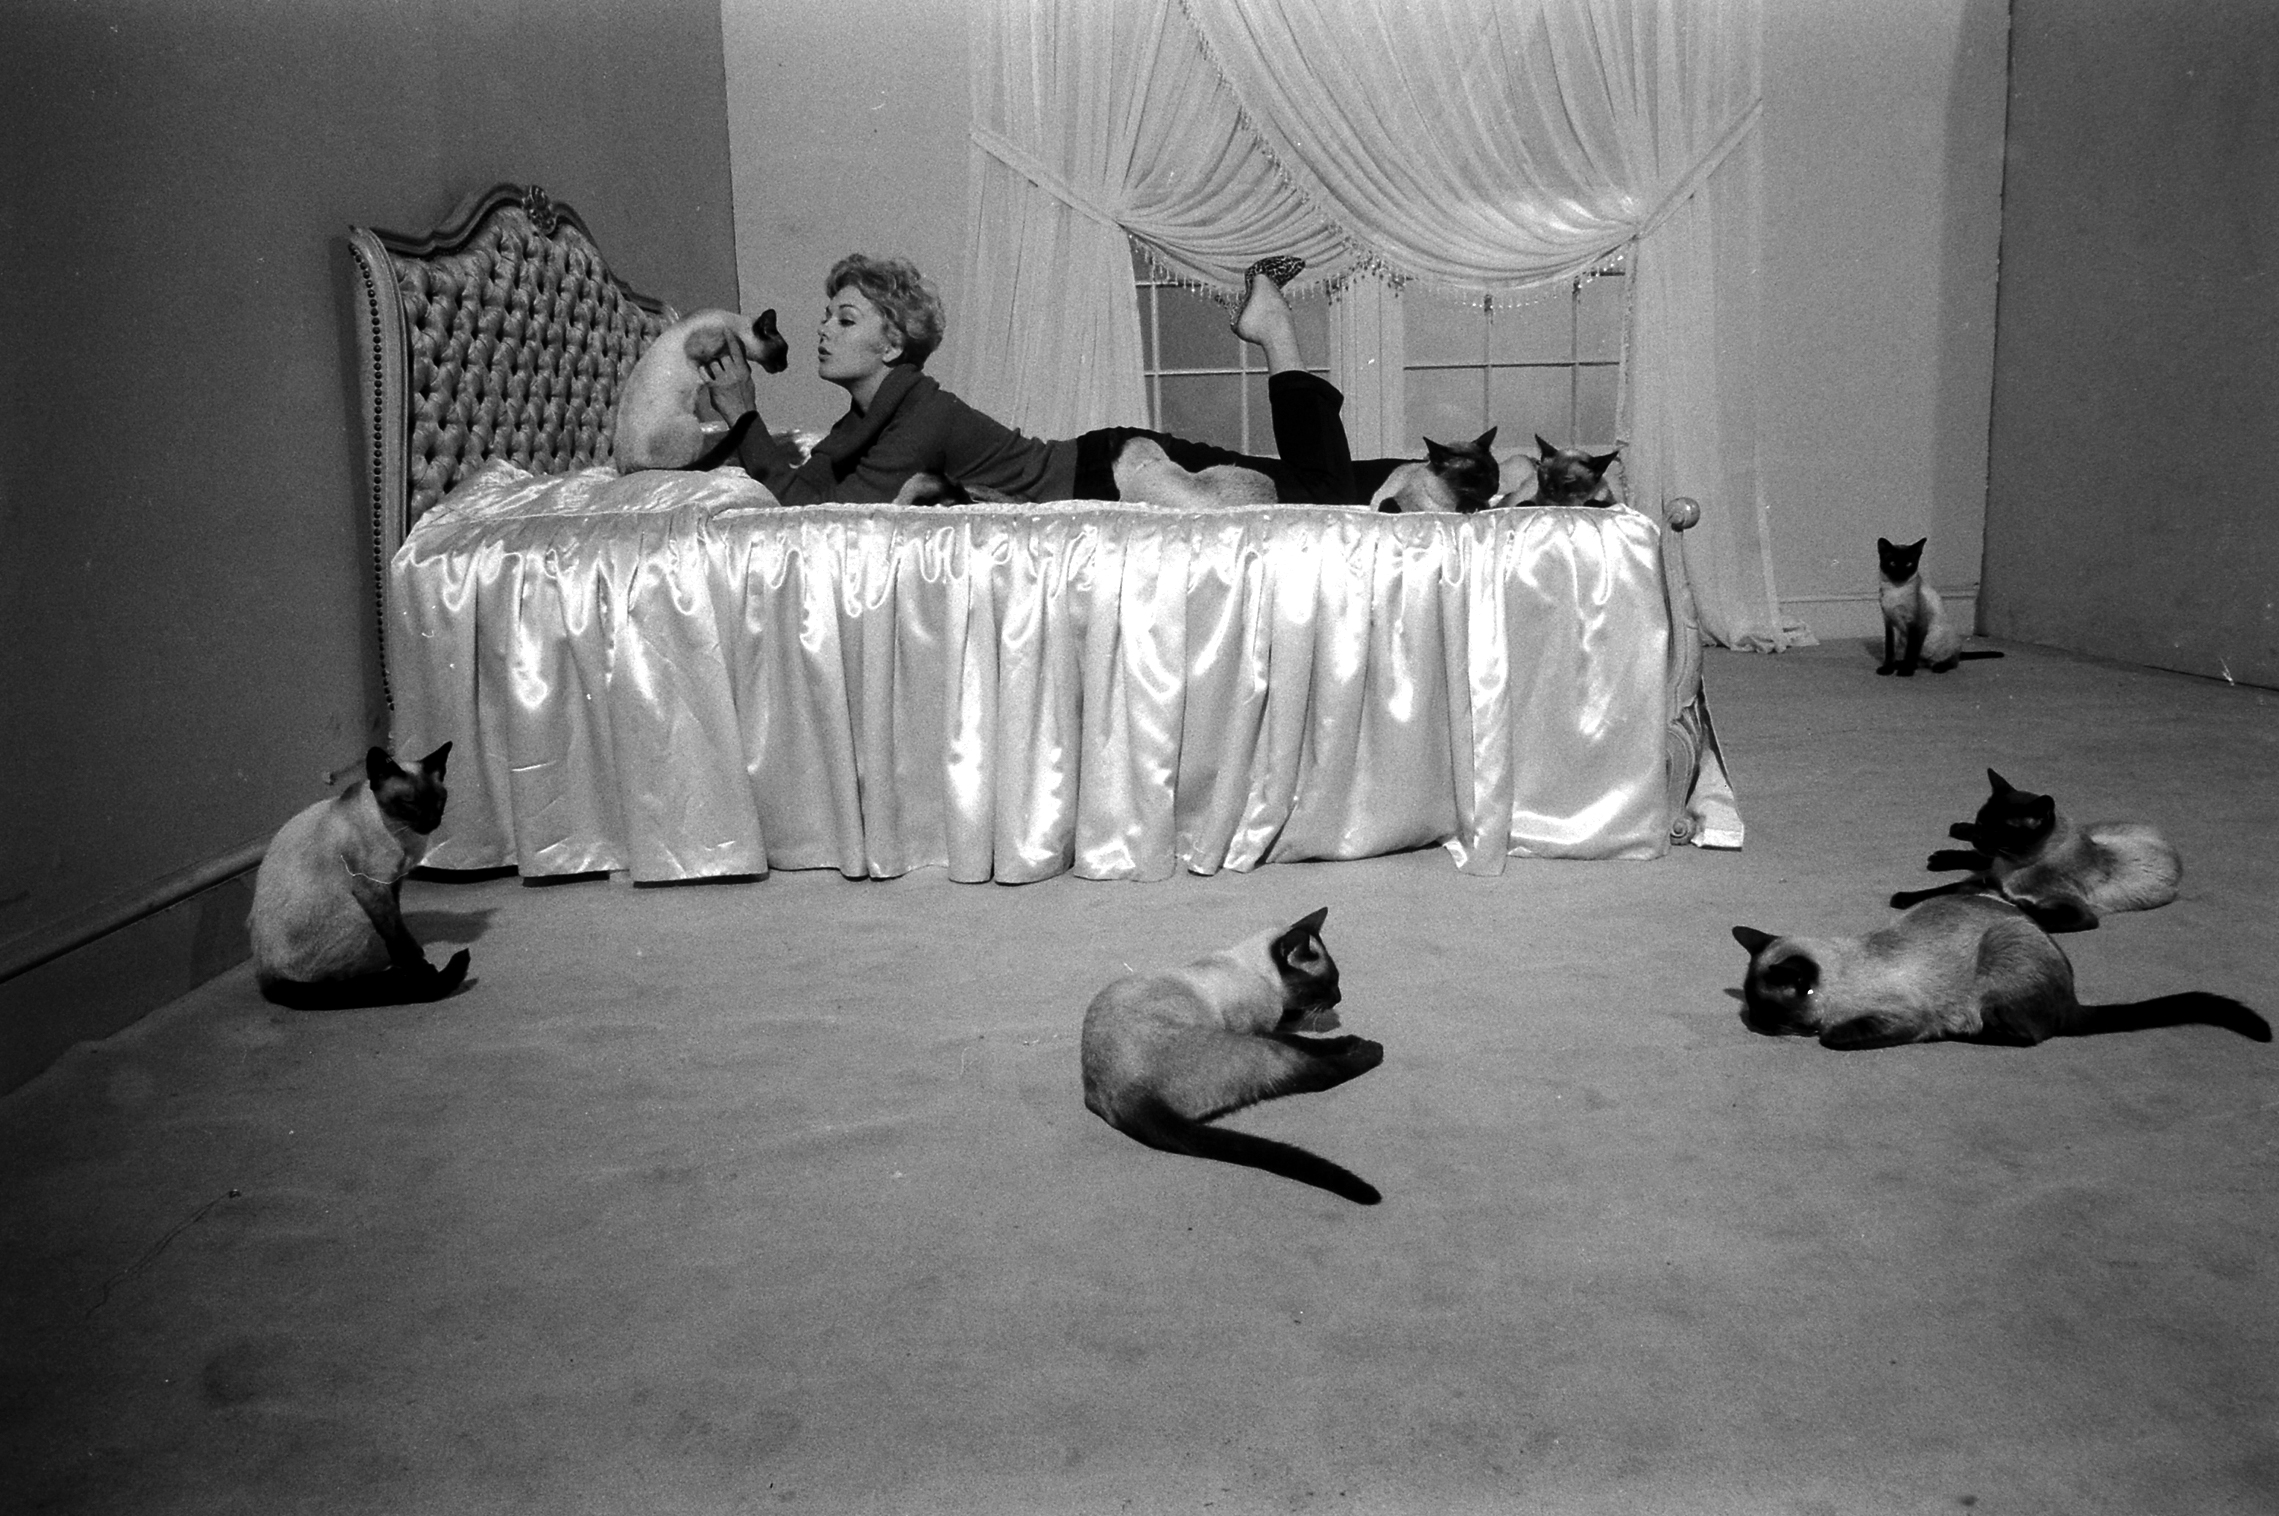 Kim Novak playing with some Siamese cats that were used in one of her movies, "Bell, Book and Candle," 1958.